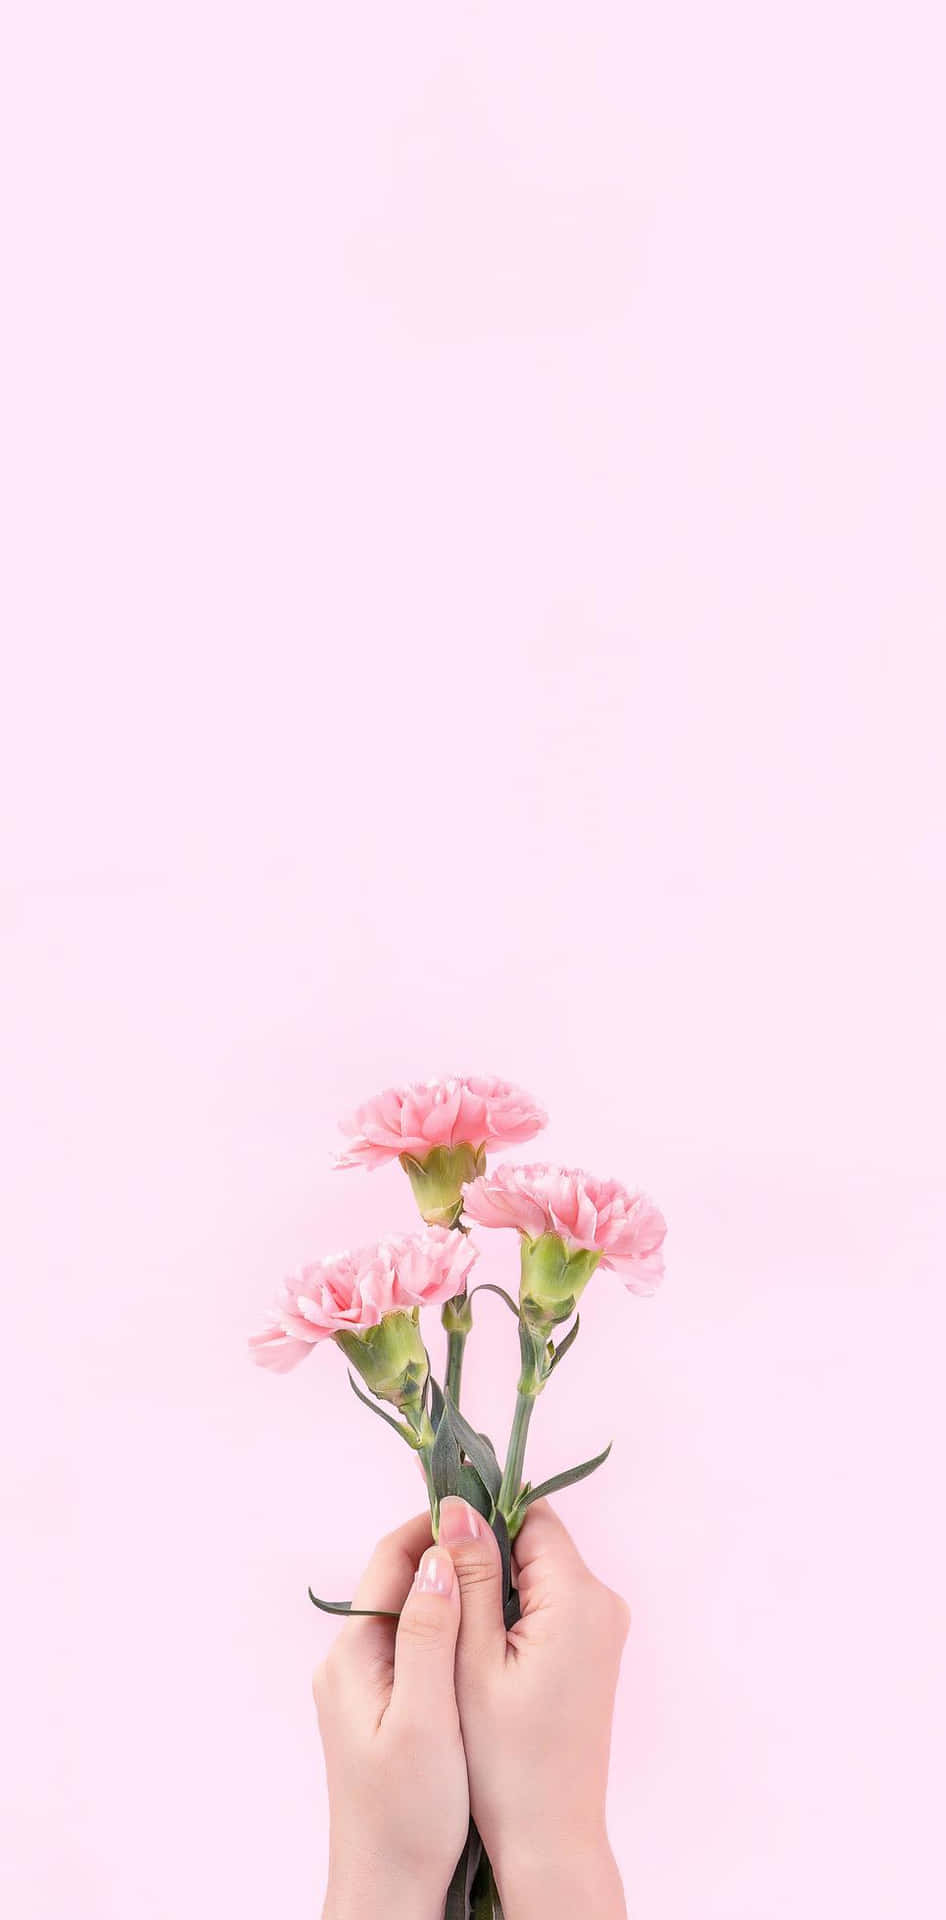 A dreamy aesthetic of baby pink Wallpaper